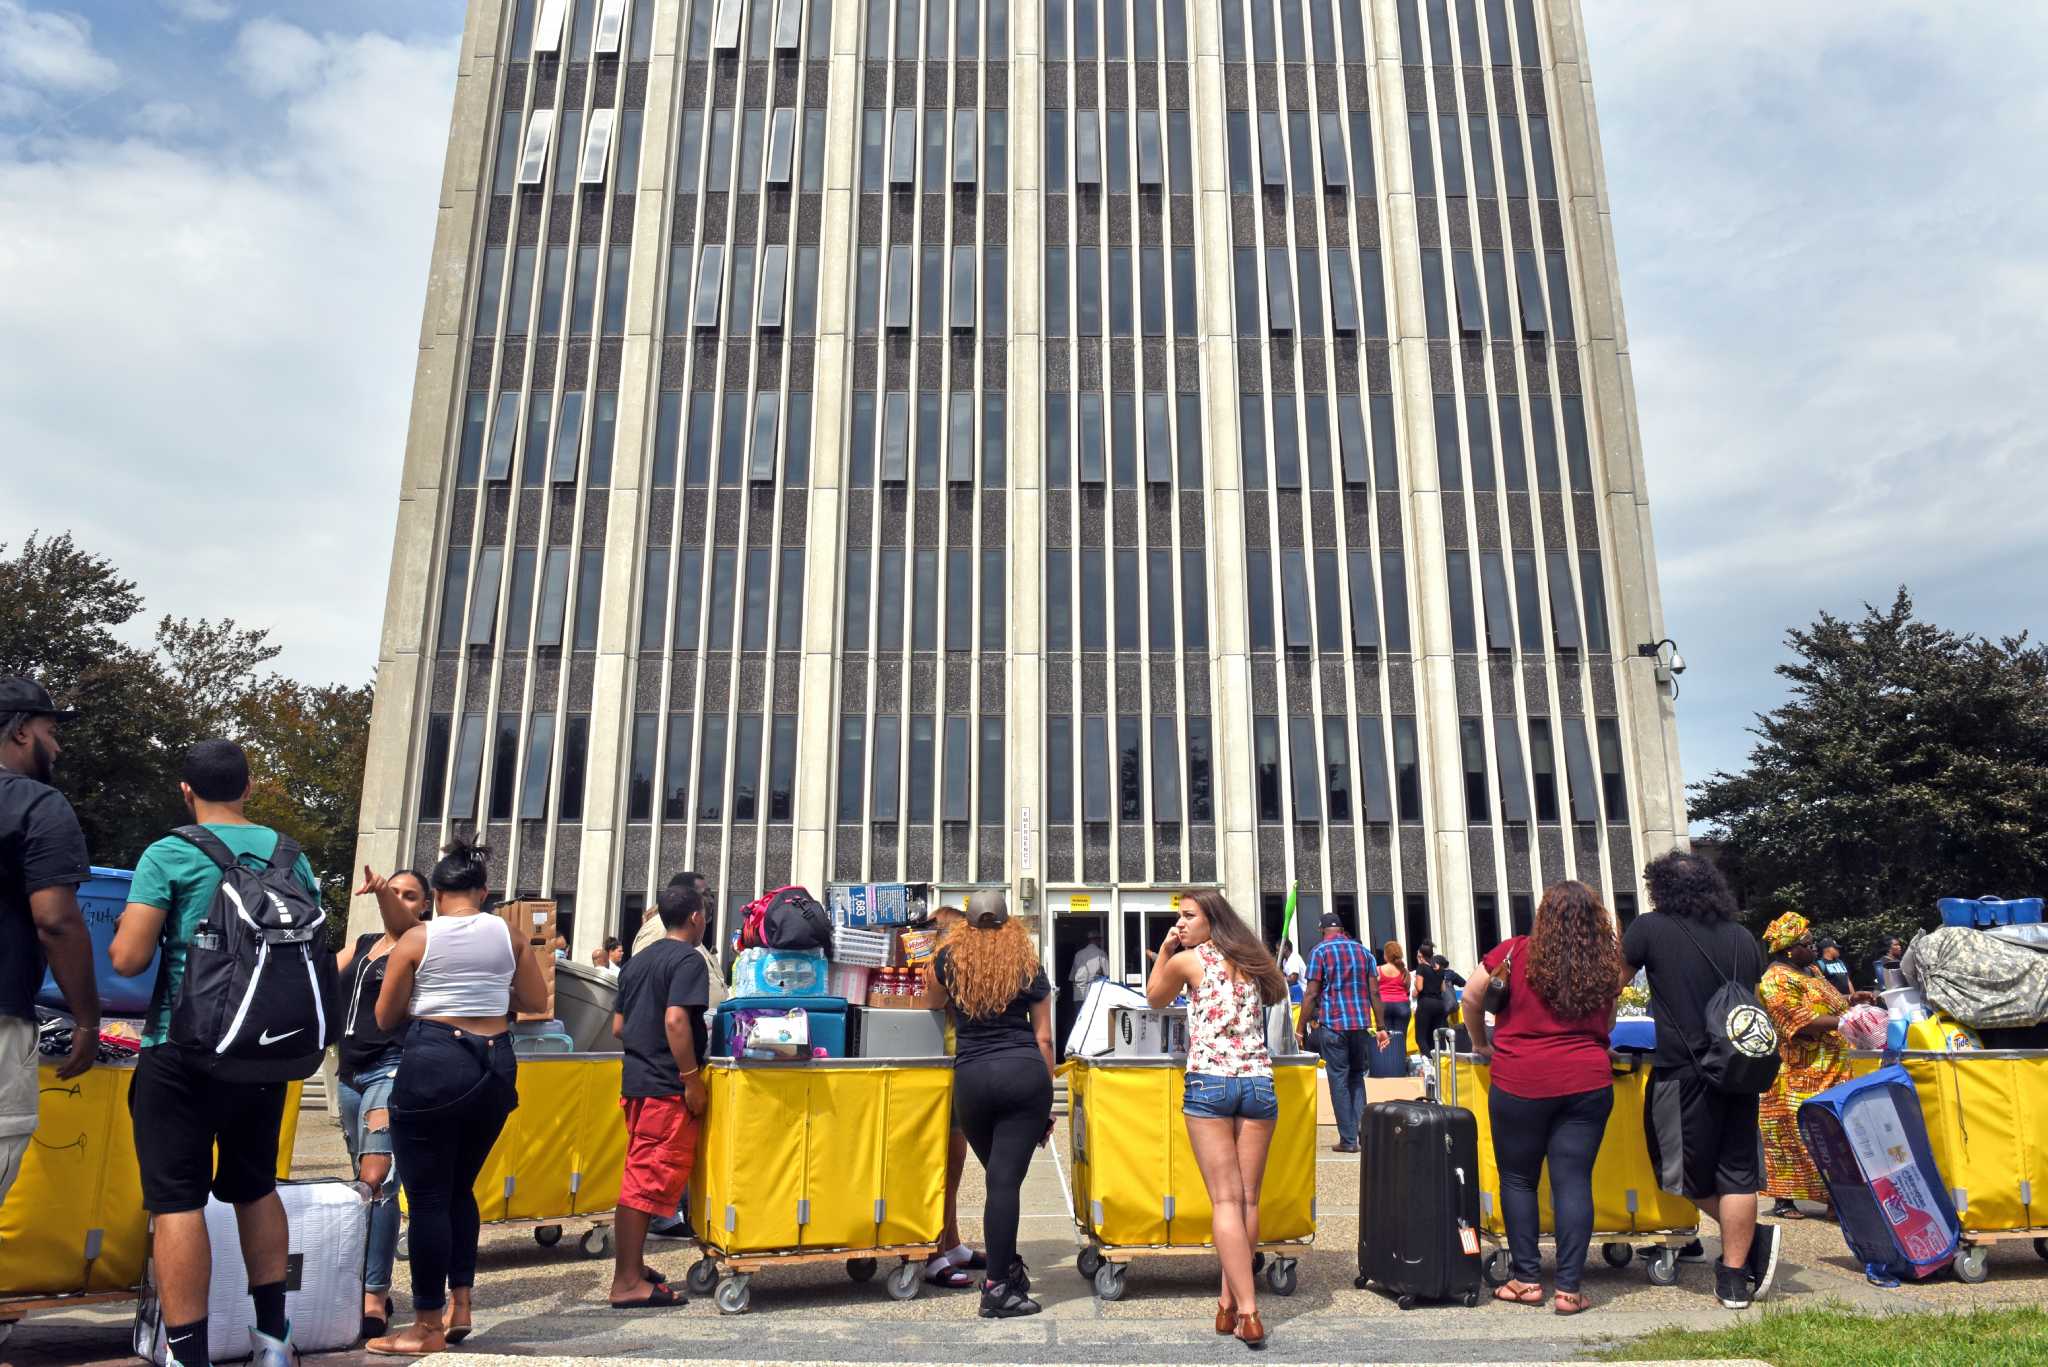 Is free tuition behind UAlbany's record applicant pool?